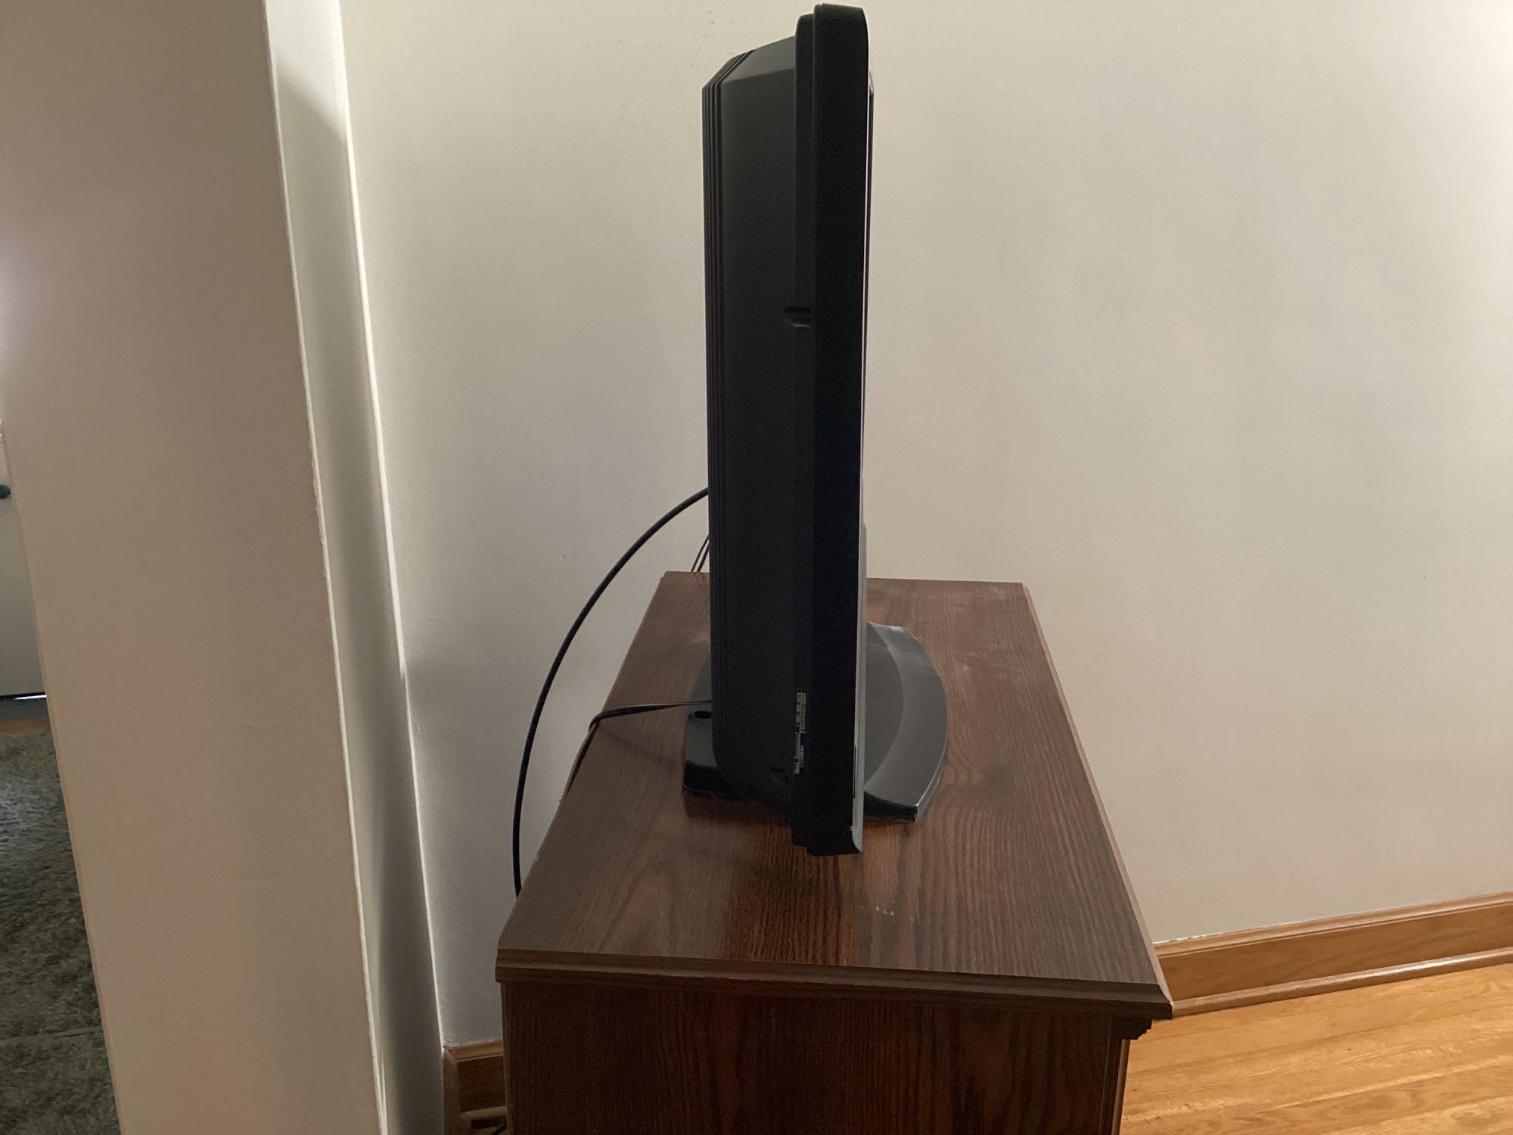 Image for Emerson TV, Stand, and Movies